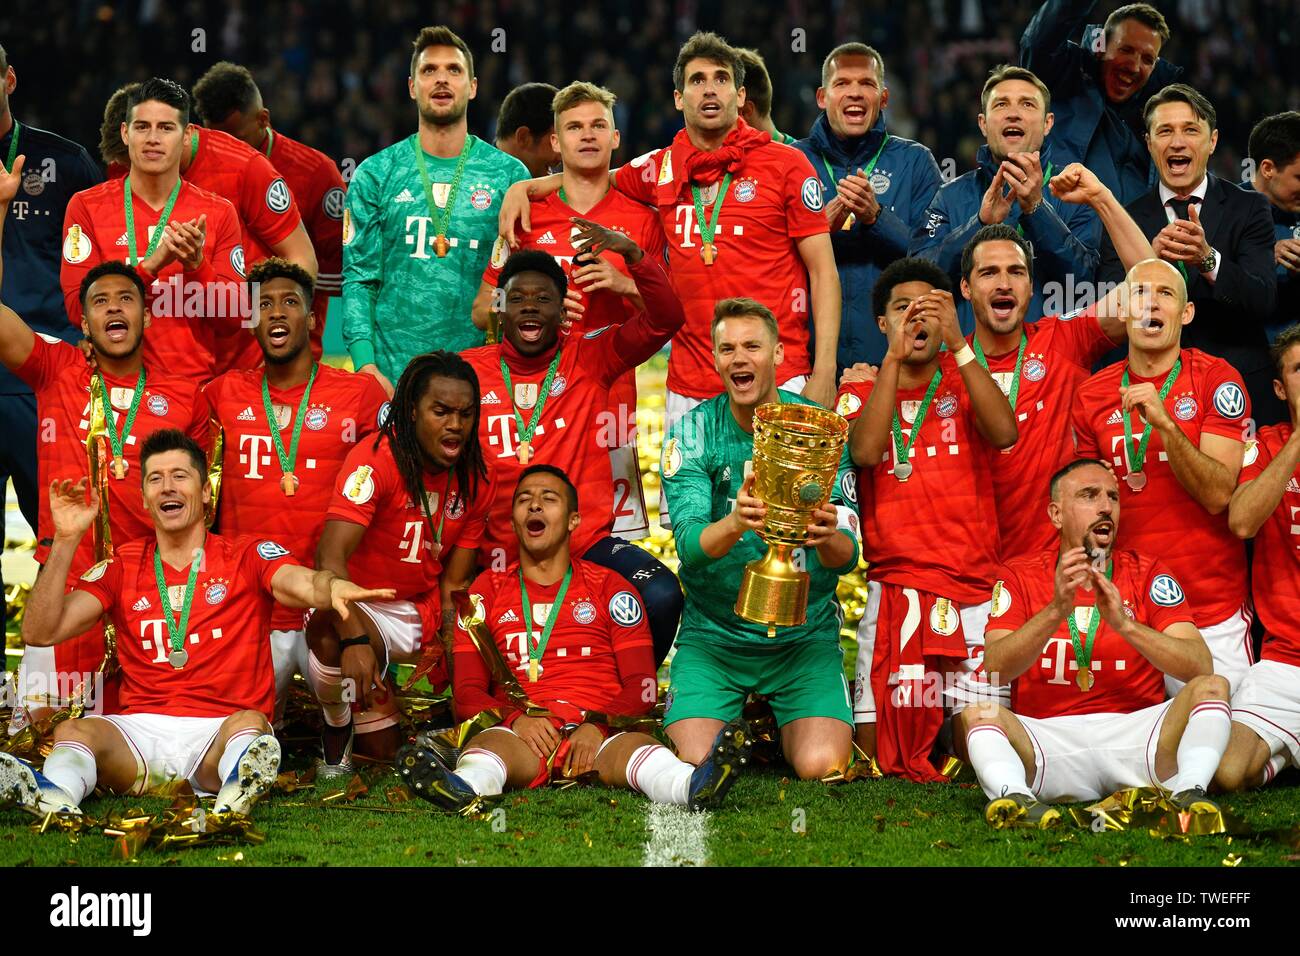 Group Photo FC Bayern wins DFB Cup, 76th DFB Cup Final RB Leipzig, RBL, against FC Bayern Munich, FCB, Olympic stadion Berlin, Germany Stock Photo